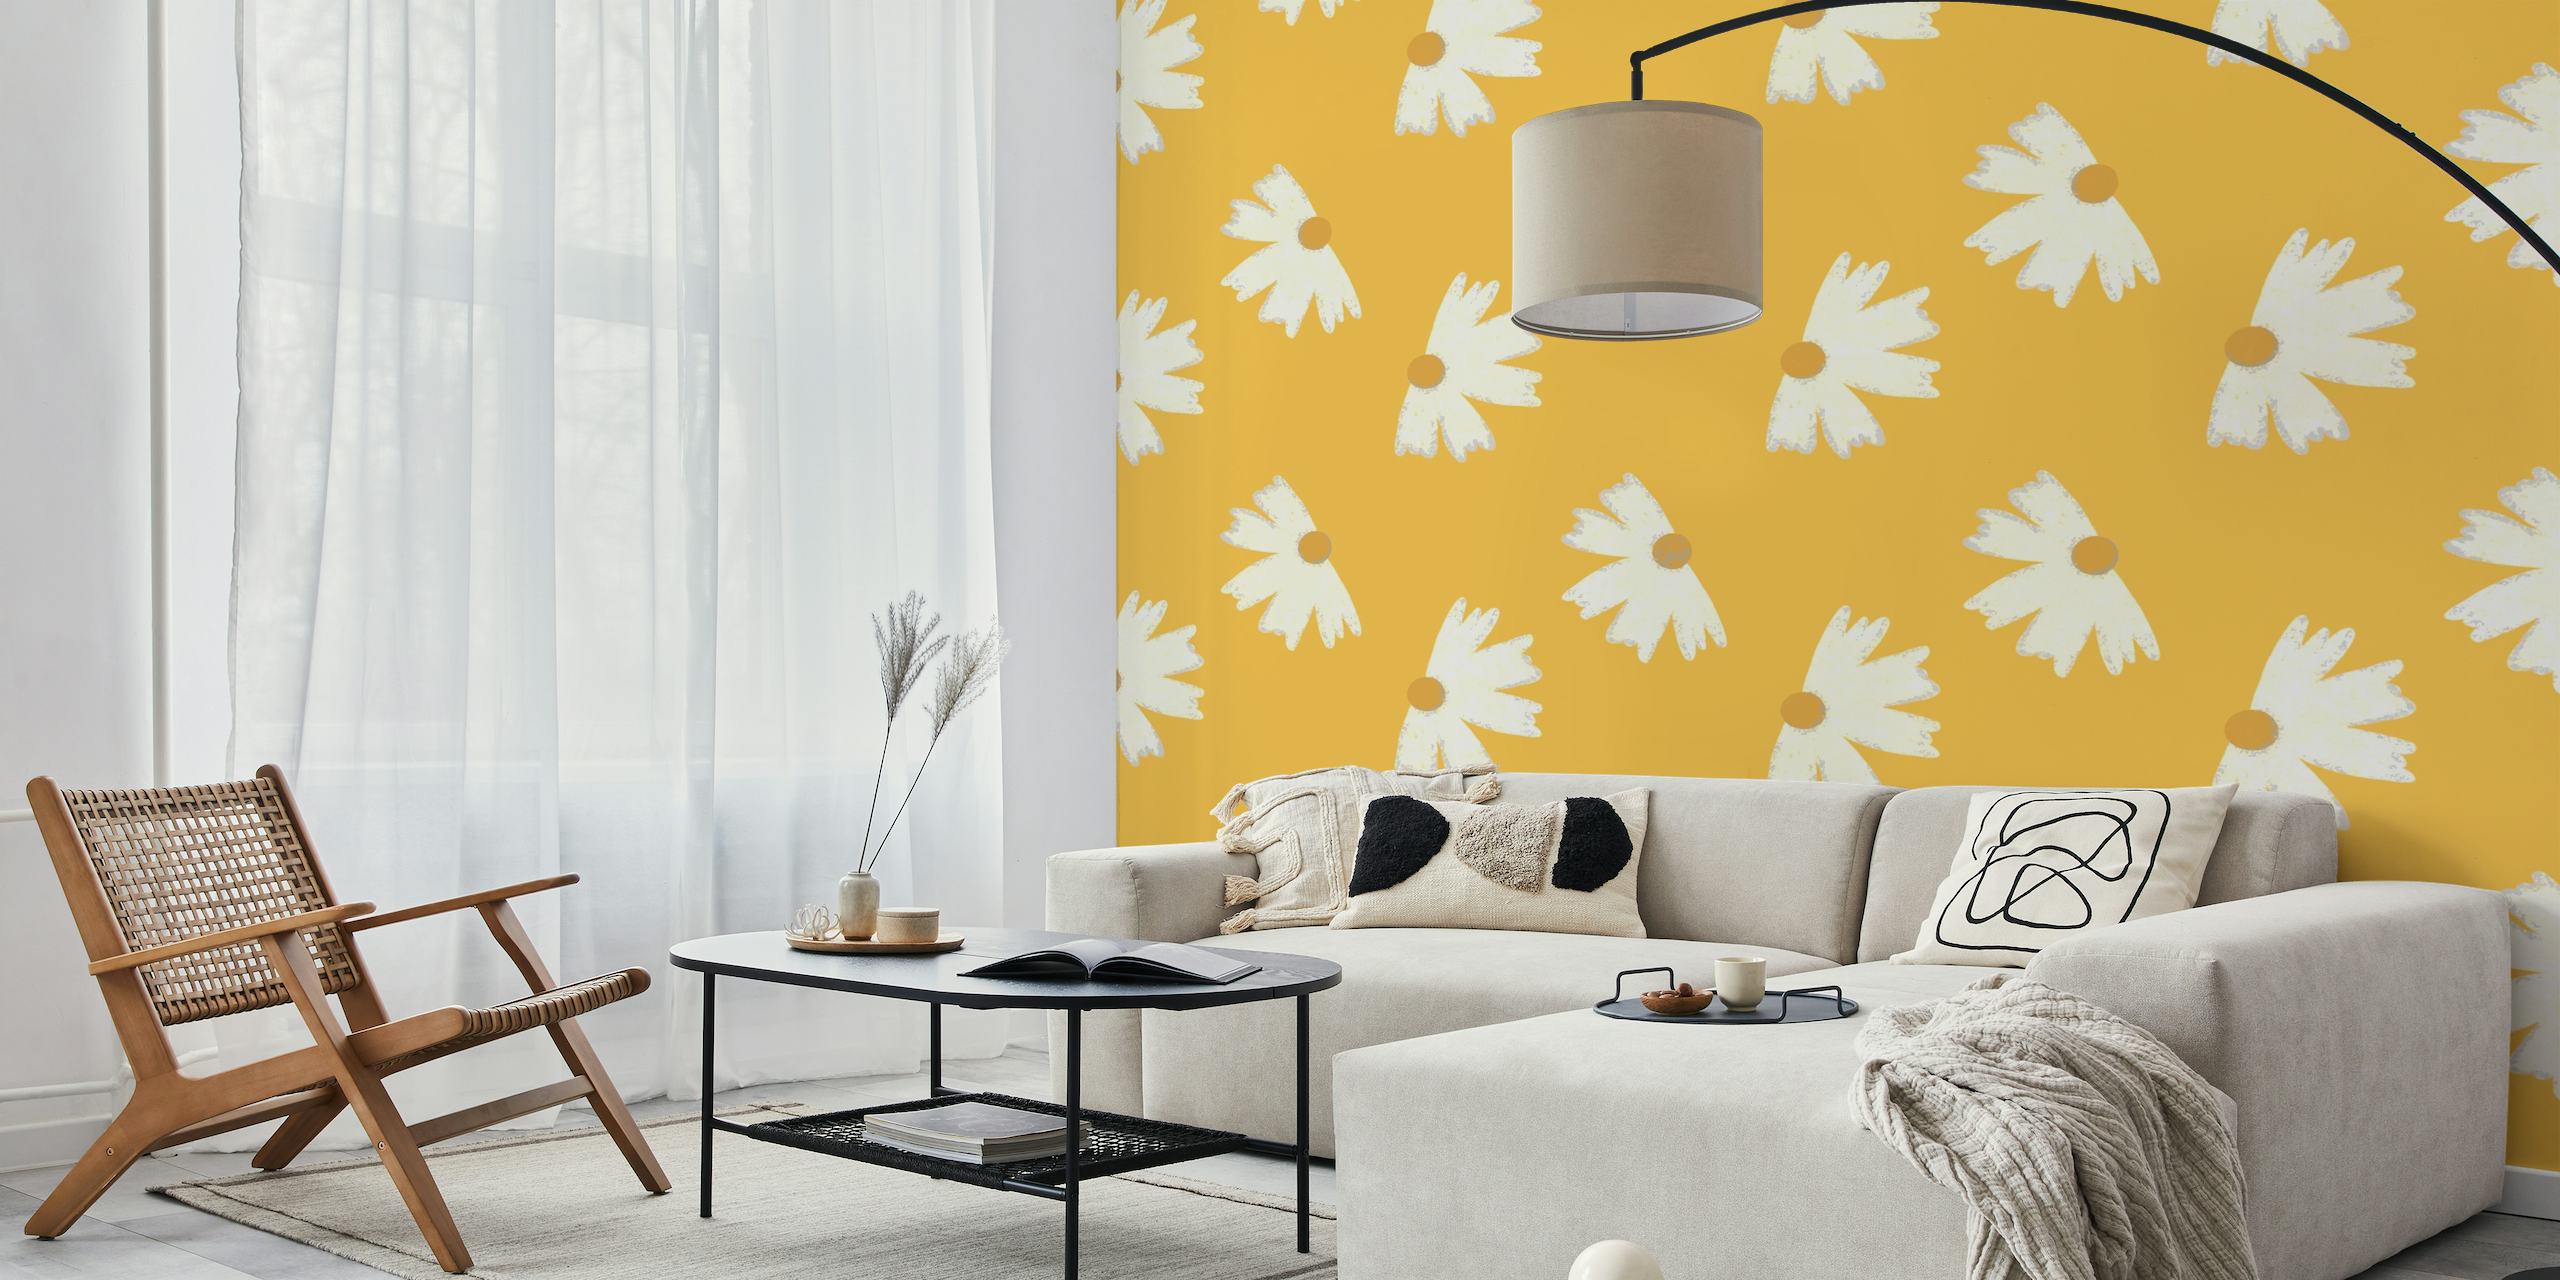 Marigold yellow background with white daisy pattern wall mural